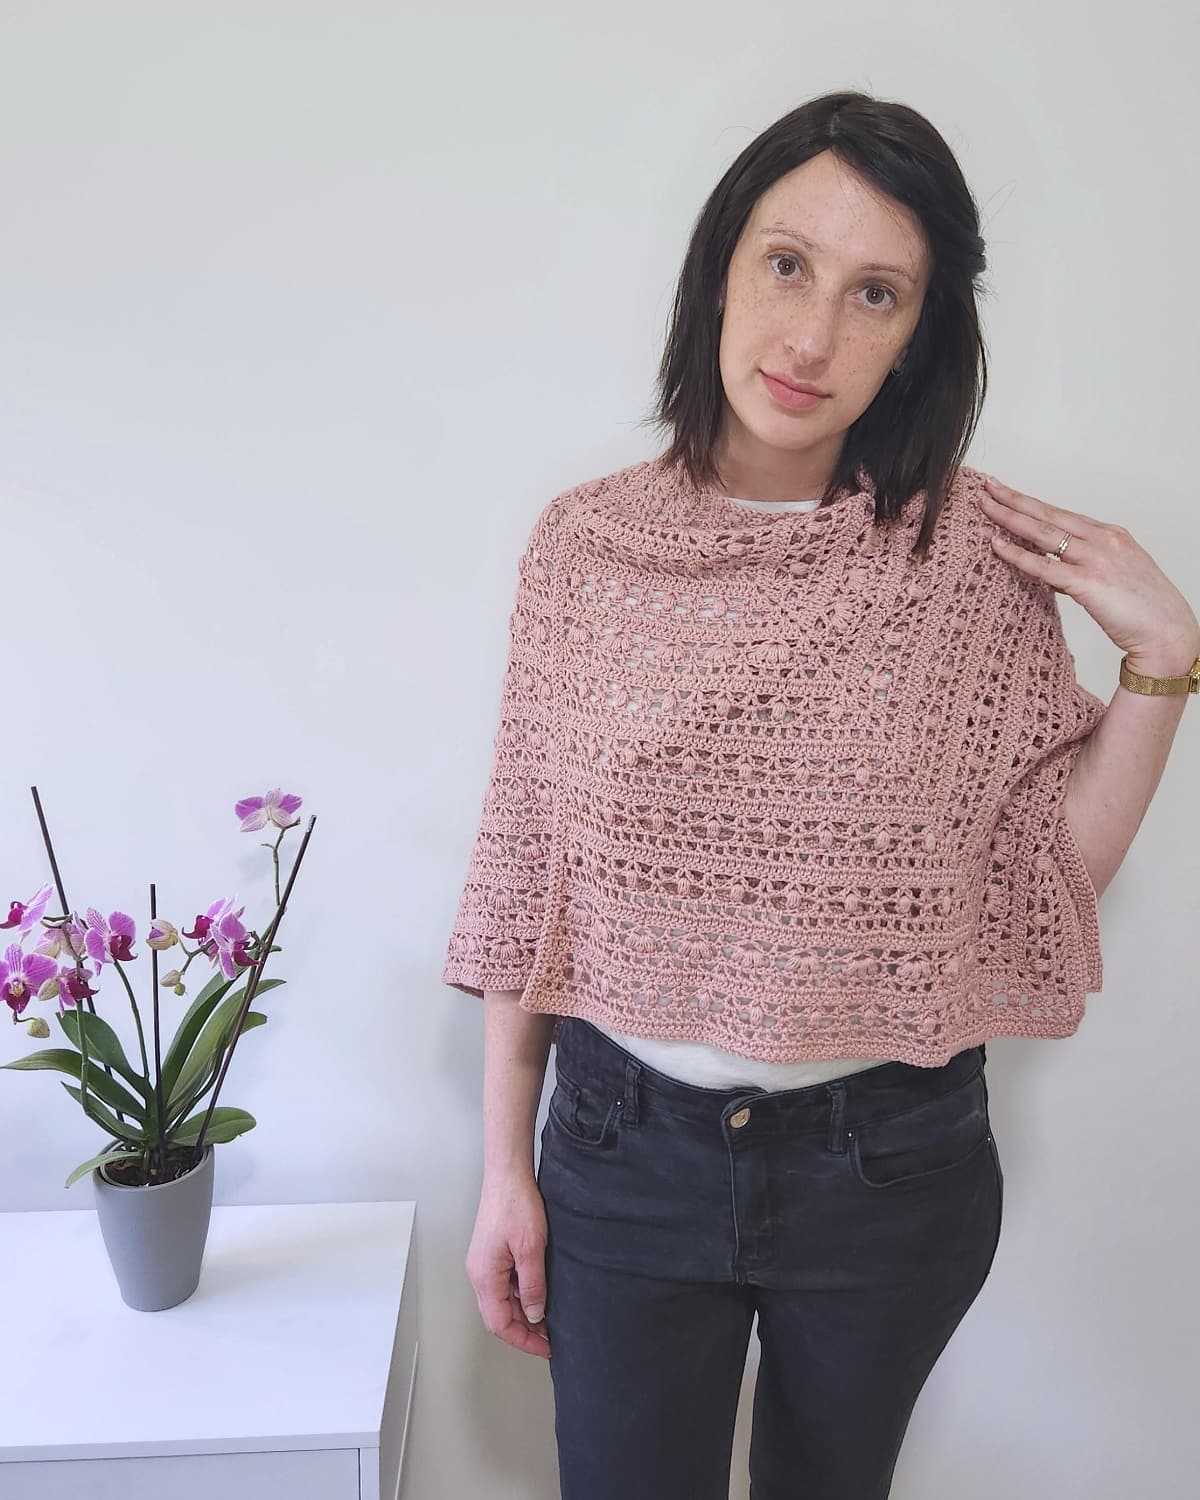 crochet lace shawl pattern for summer